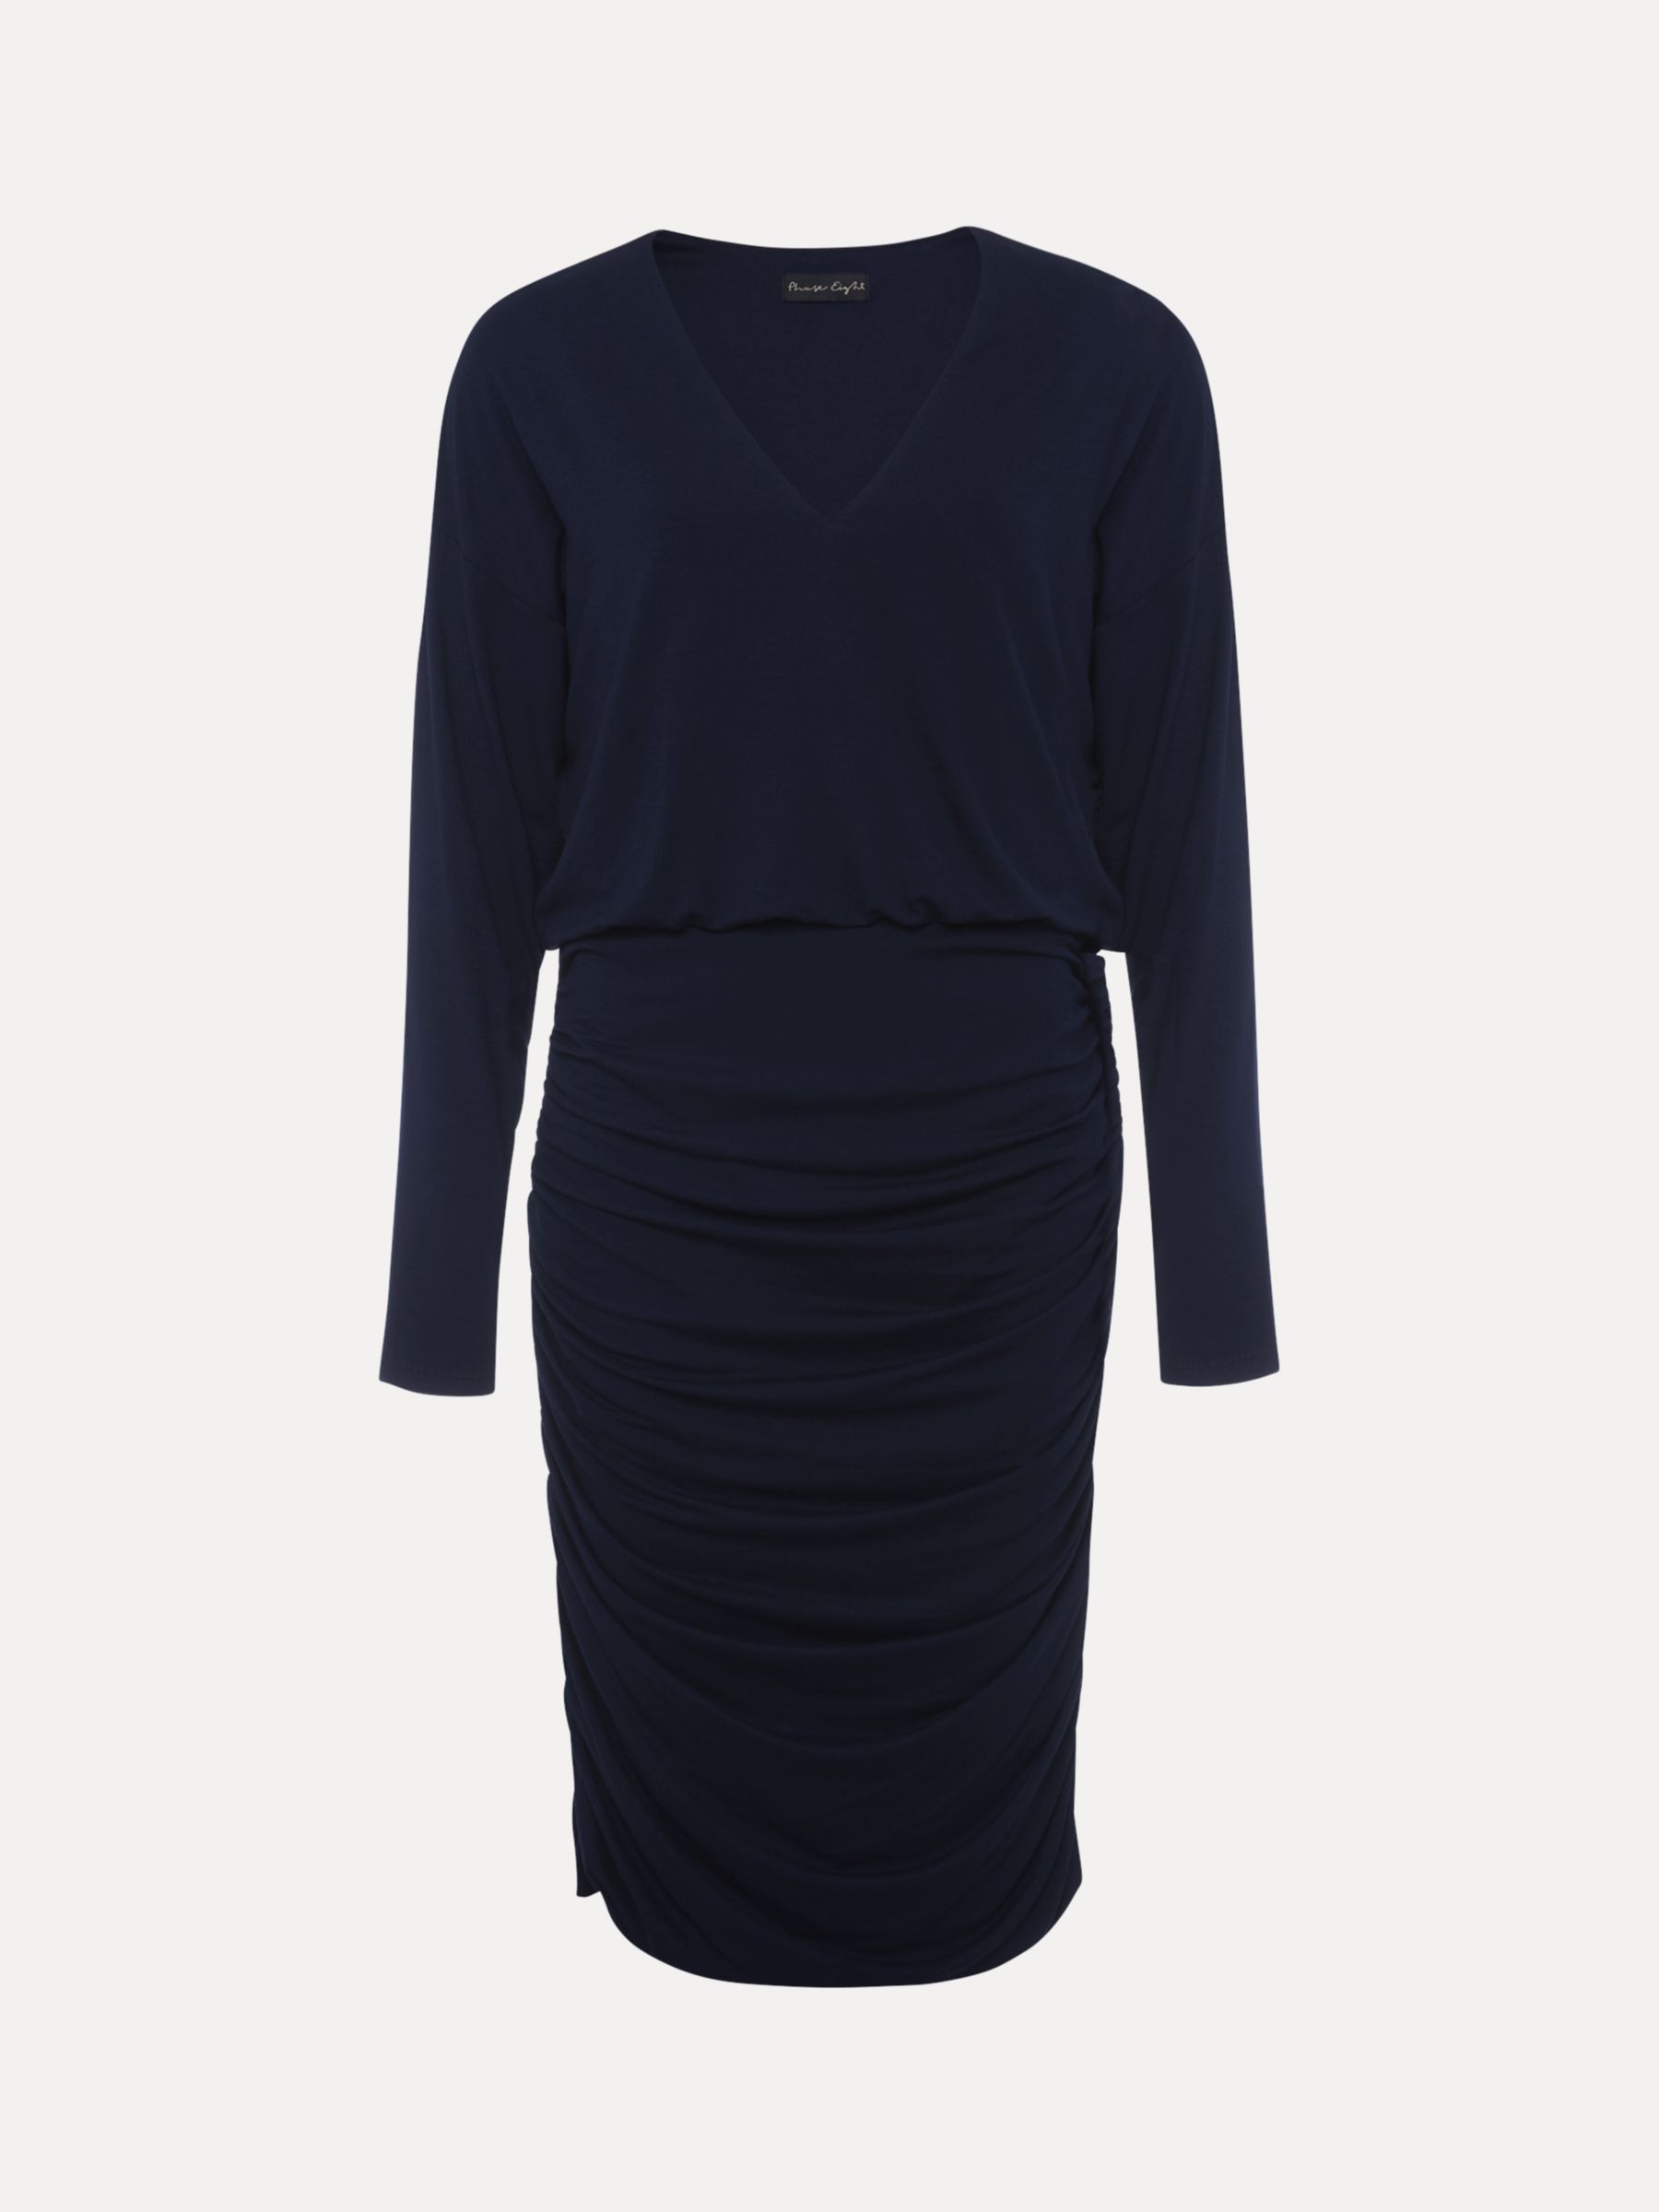 Phase Eight Jules Jersey Belted Batwing Dress, Navy, 8